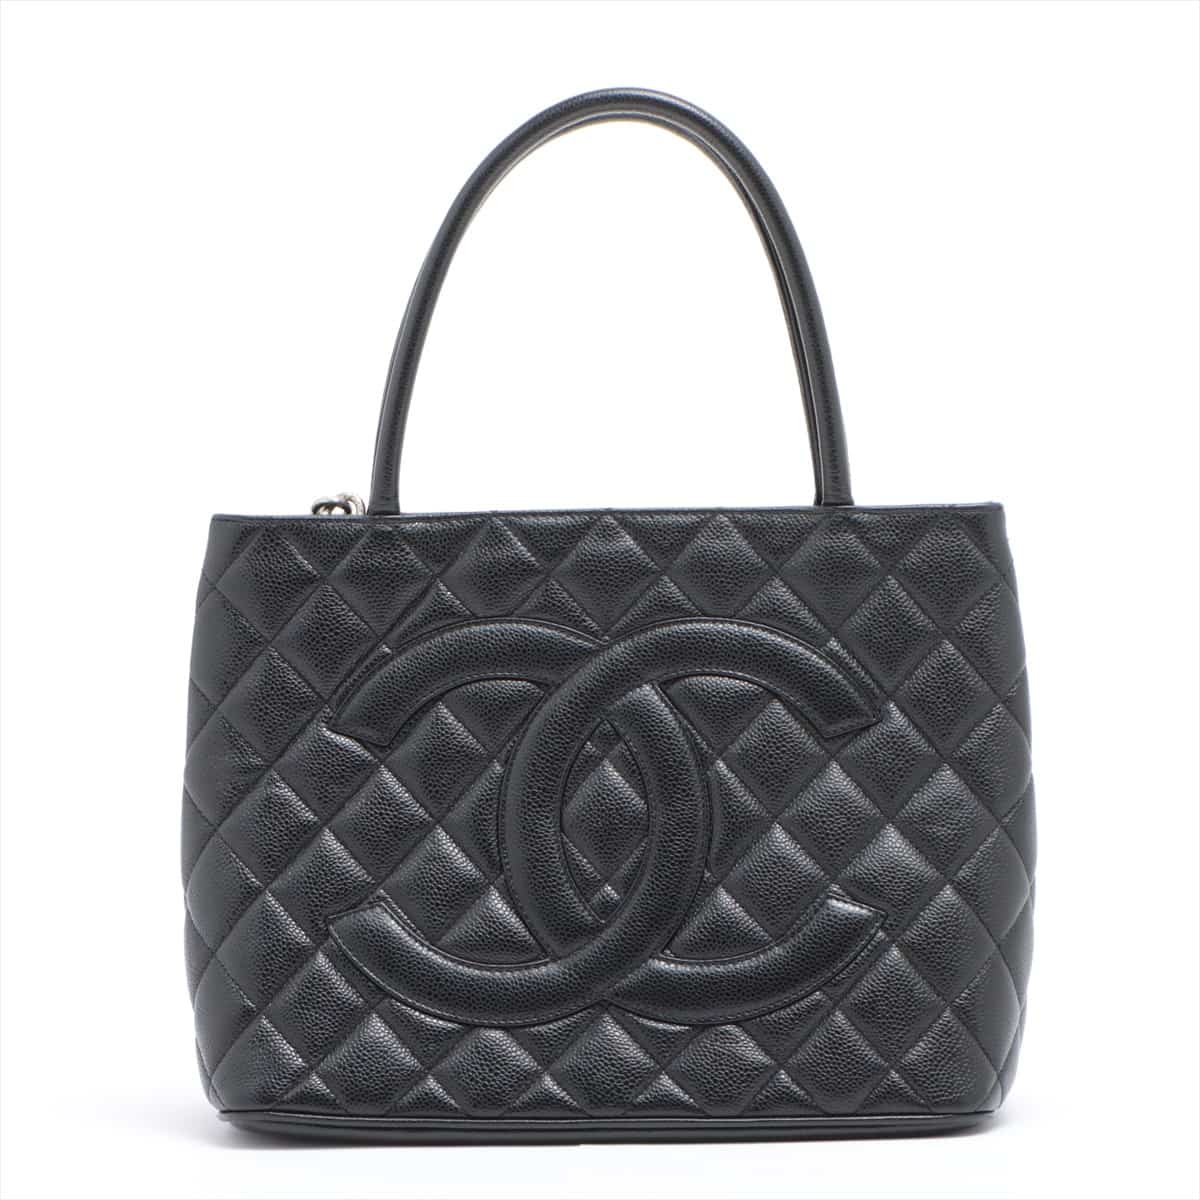 Chanel Re-release Caviarskin Tote bag Black Silver Metal fittings 7XXXXXX